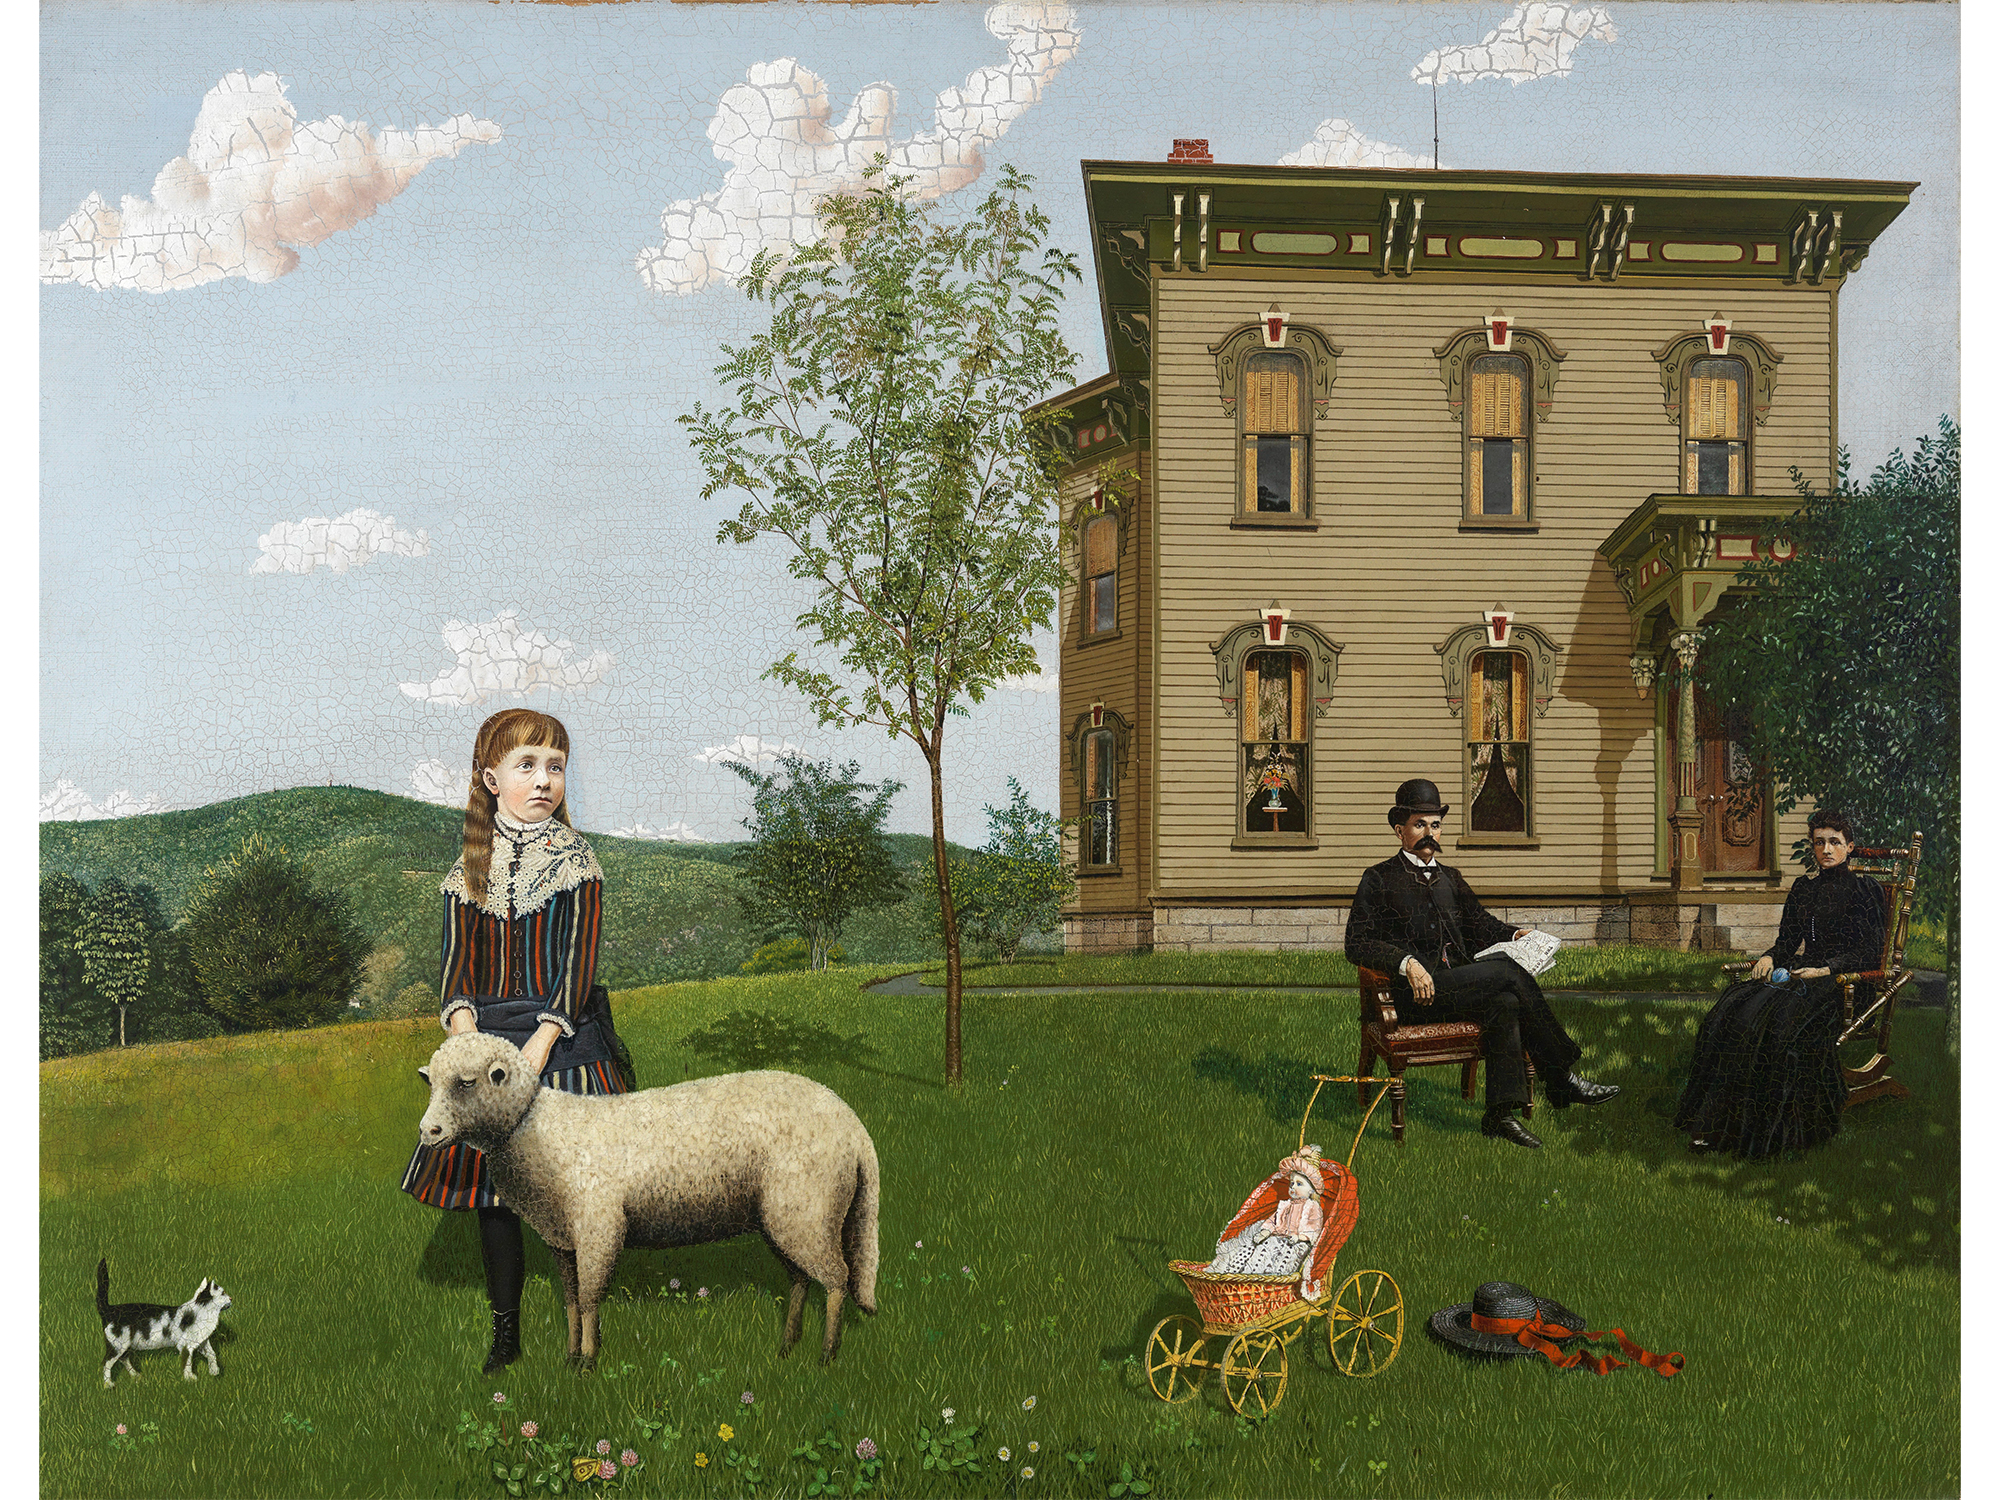 Realistic painting of a young girl with a lamb on the front yard of an older house. Behind the girl is a man and a woman sitting in chairs